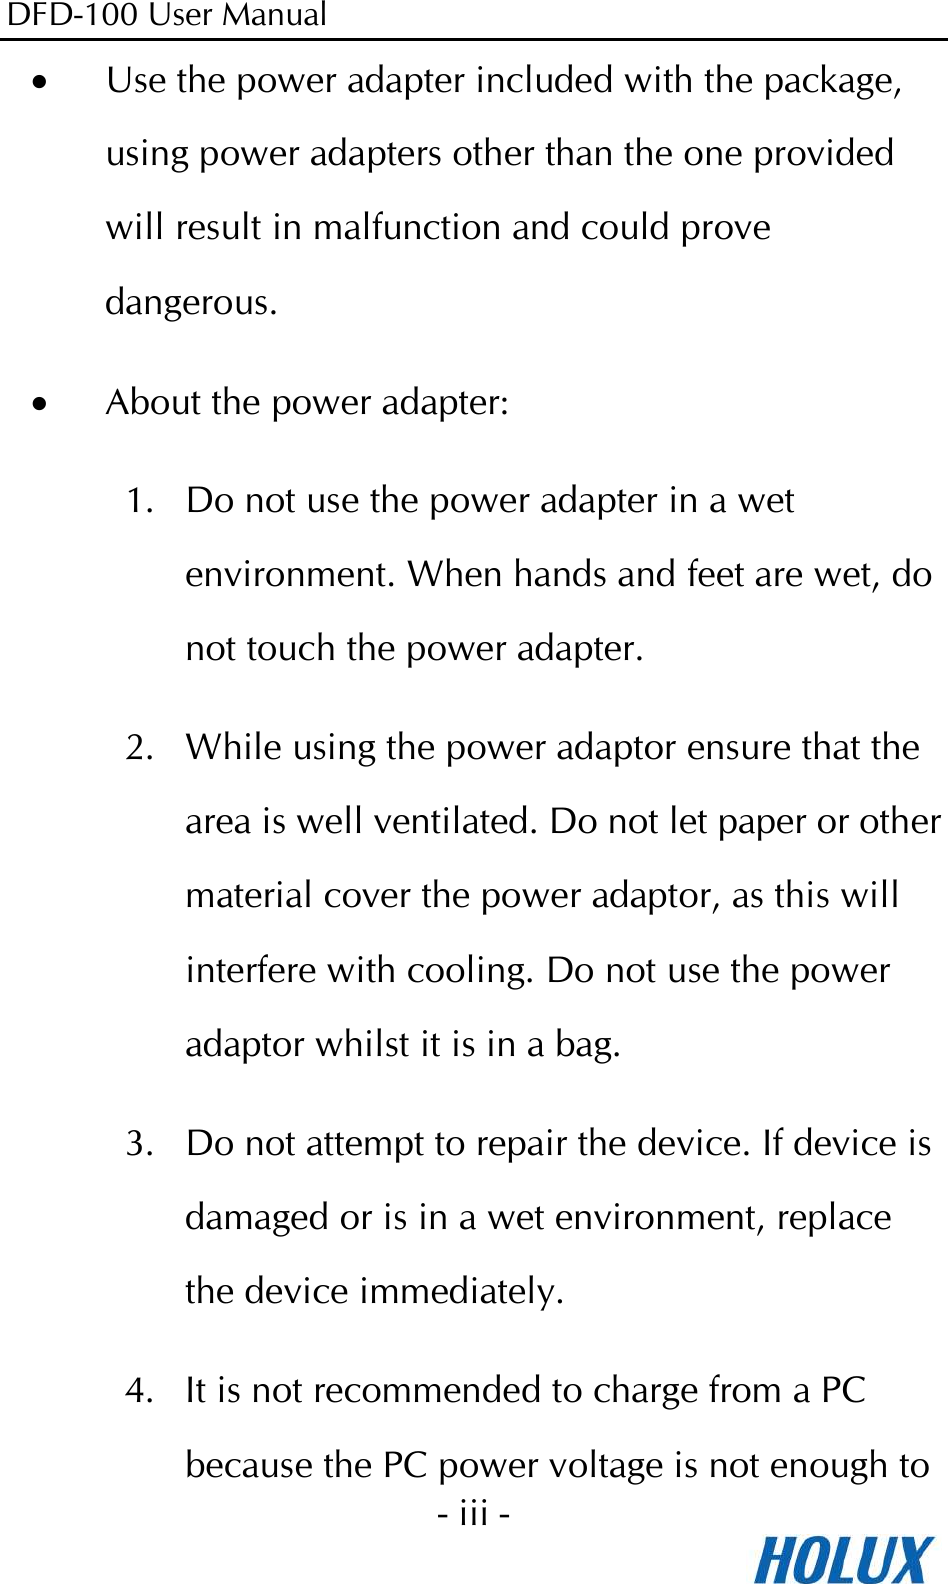 DFD-100 User Manual - iii -  • Use the power adapter included with the package, using power adapters other than the one provided will result in malfunction and could prove dangerous. • About the power adapter: 1. Do not use the power adapter in a wet environment. When hands and feet are wet, do not touch the power adapter. 2. While using the power adaptor ensure that the area is well ventilated. Do not let paper or other material cover the power adaptor, as this will interfere with cooling. Do not use the power adaptor whilst it is in a bag. 3. Do not attempt to repair the device. If device is damaged or is in a wet environment, replace the device immediately. 4. It is not recommended to charge from a PC because the PC power voltage is not enough to 